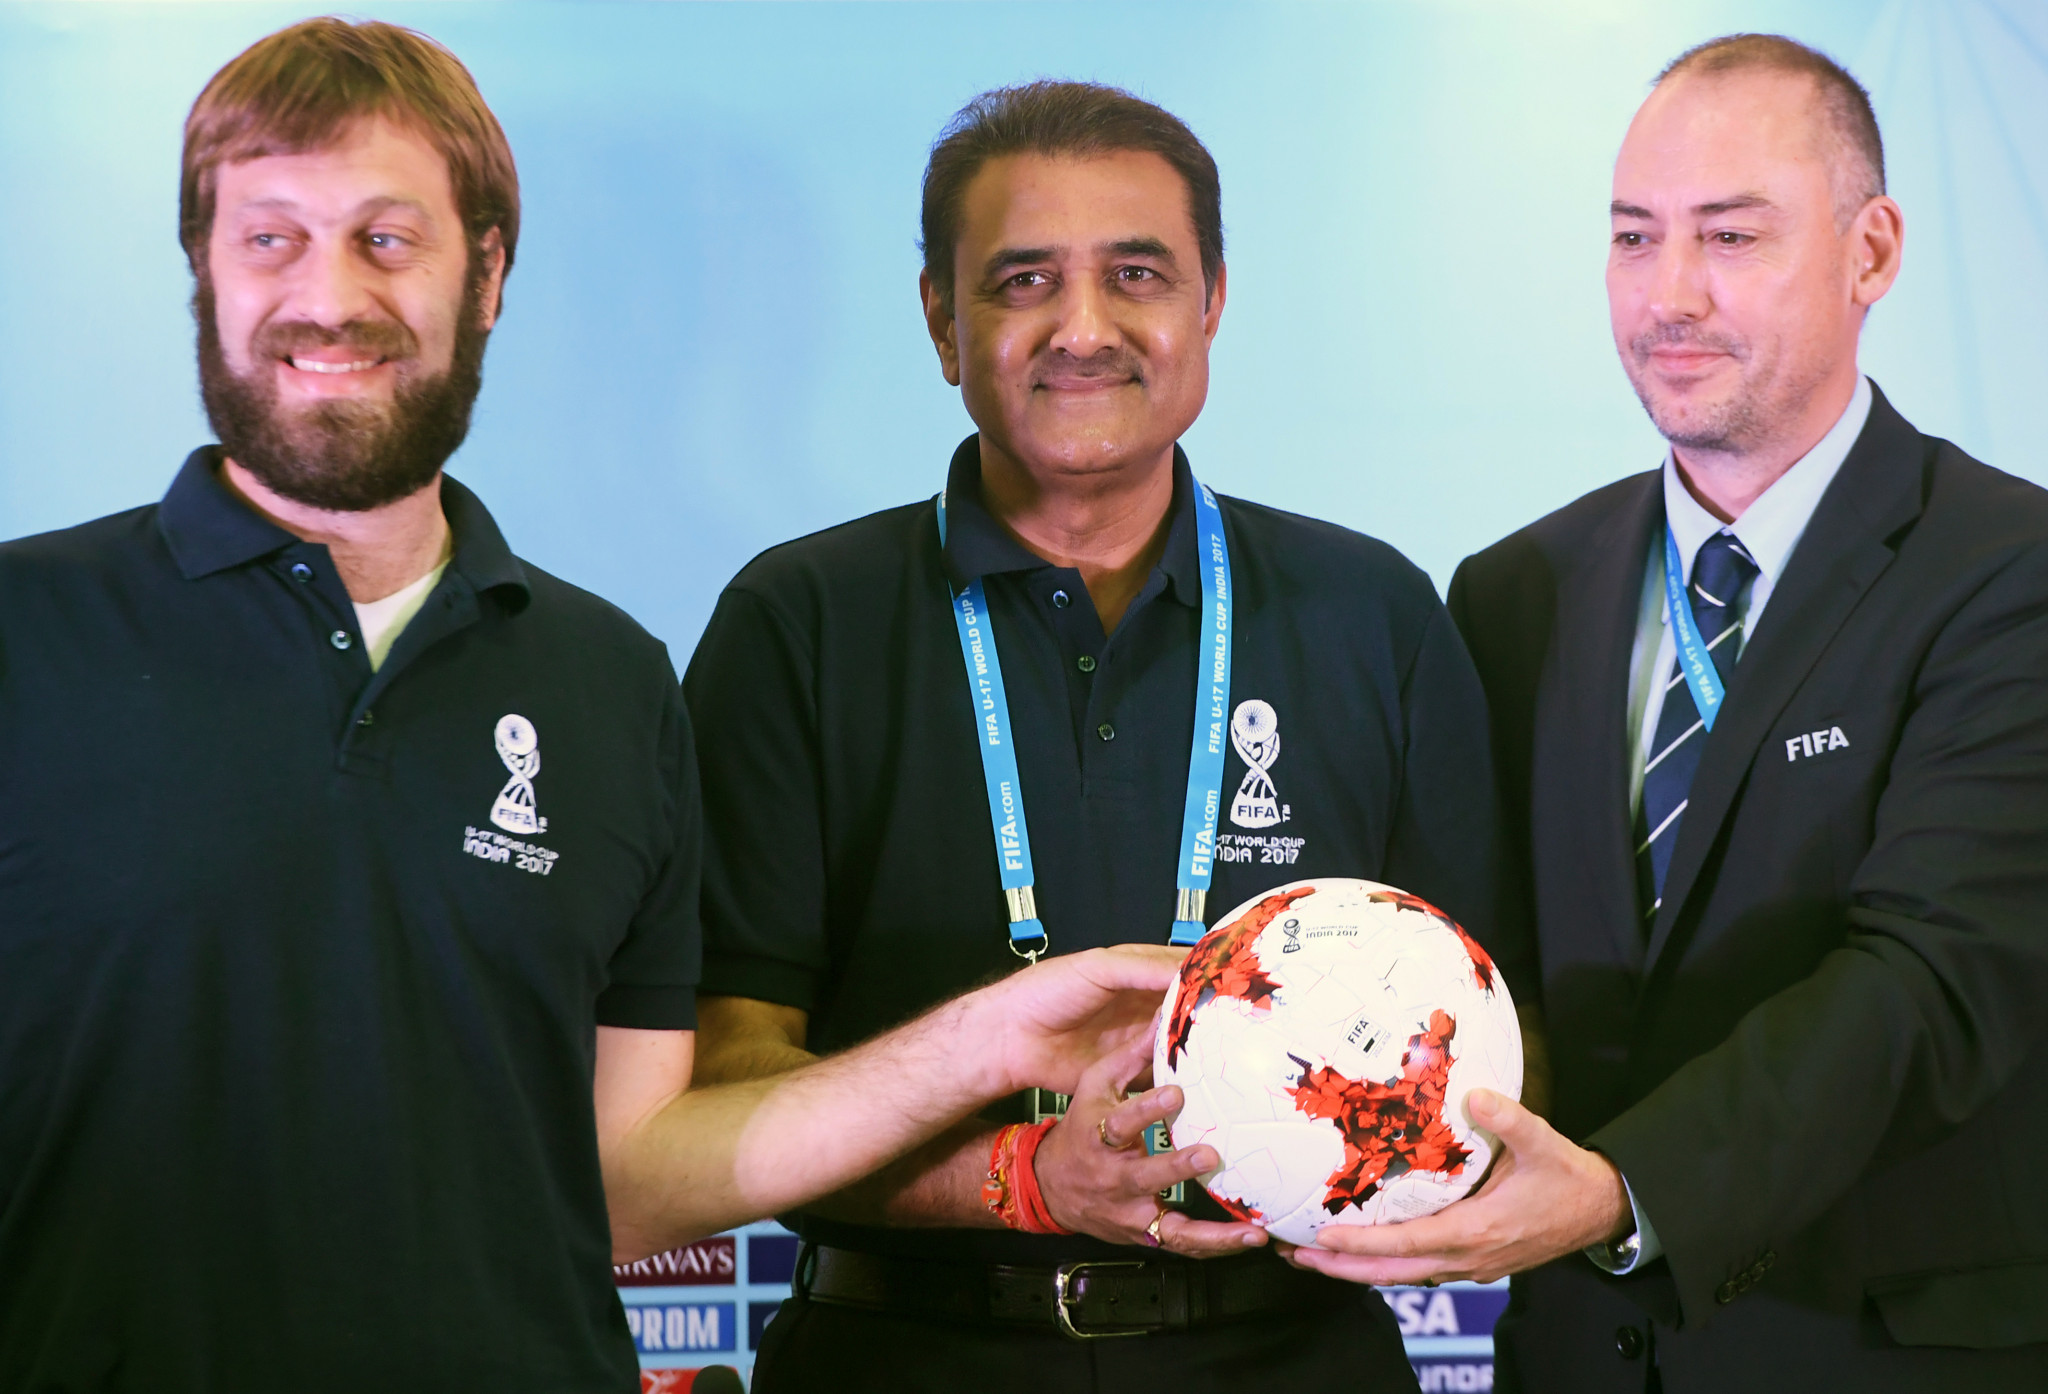 FIFA Tournaments head Jaime Yarza, right, has said he expects the 2017 Under-17 World Cup in India to break the previous attendance record on the last matchday tomorrow ©Getty Images